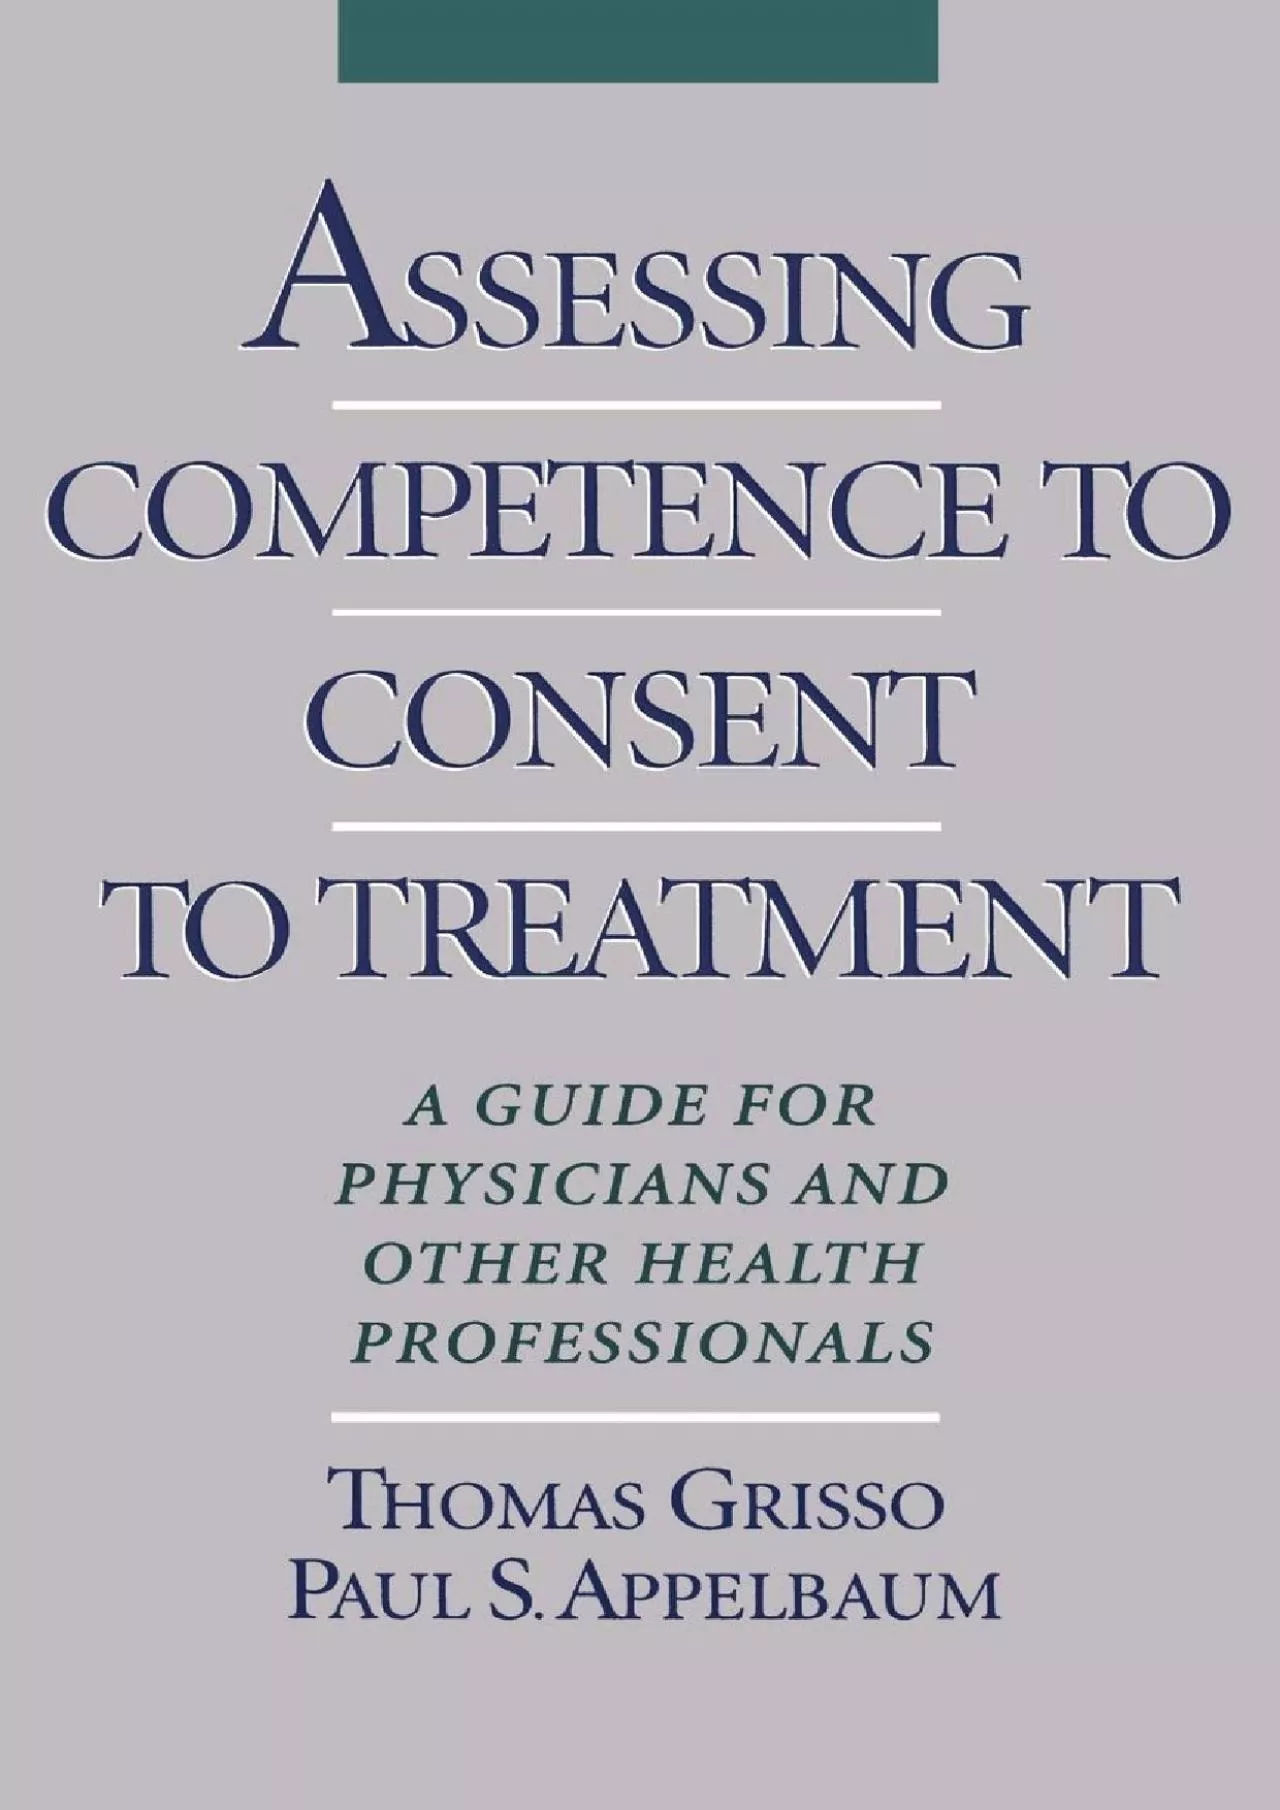 (DOWNLOAD)-Assessing Competence to Consent to Treatment: A Guide for Physicians and Other